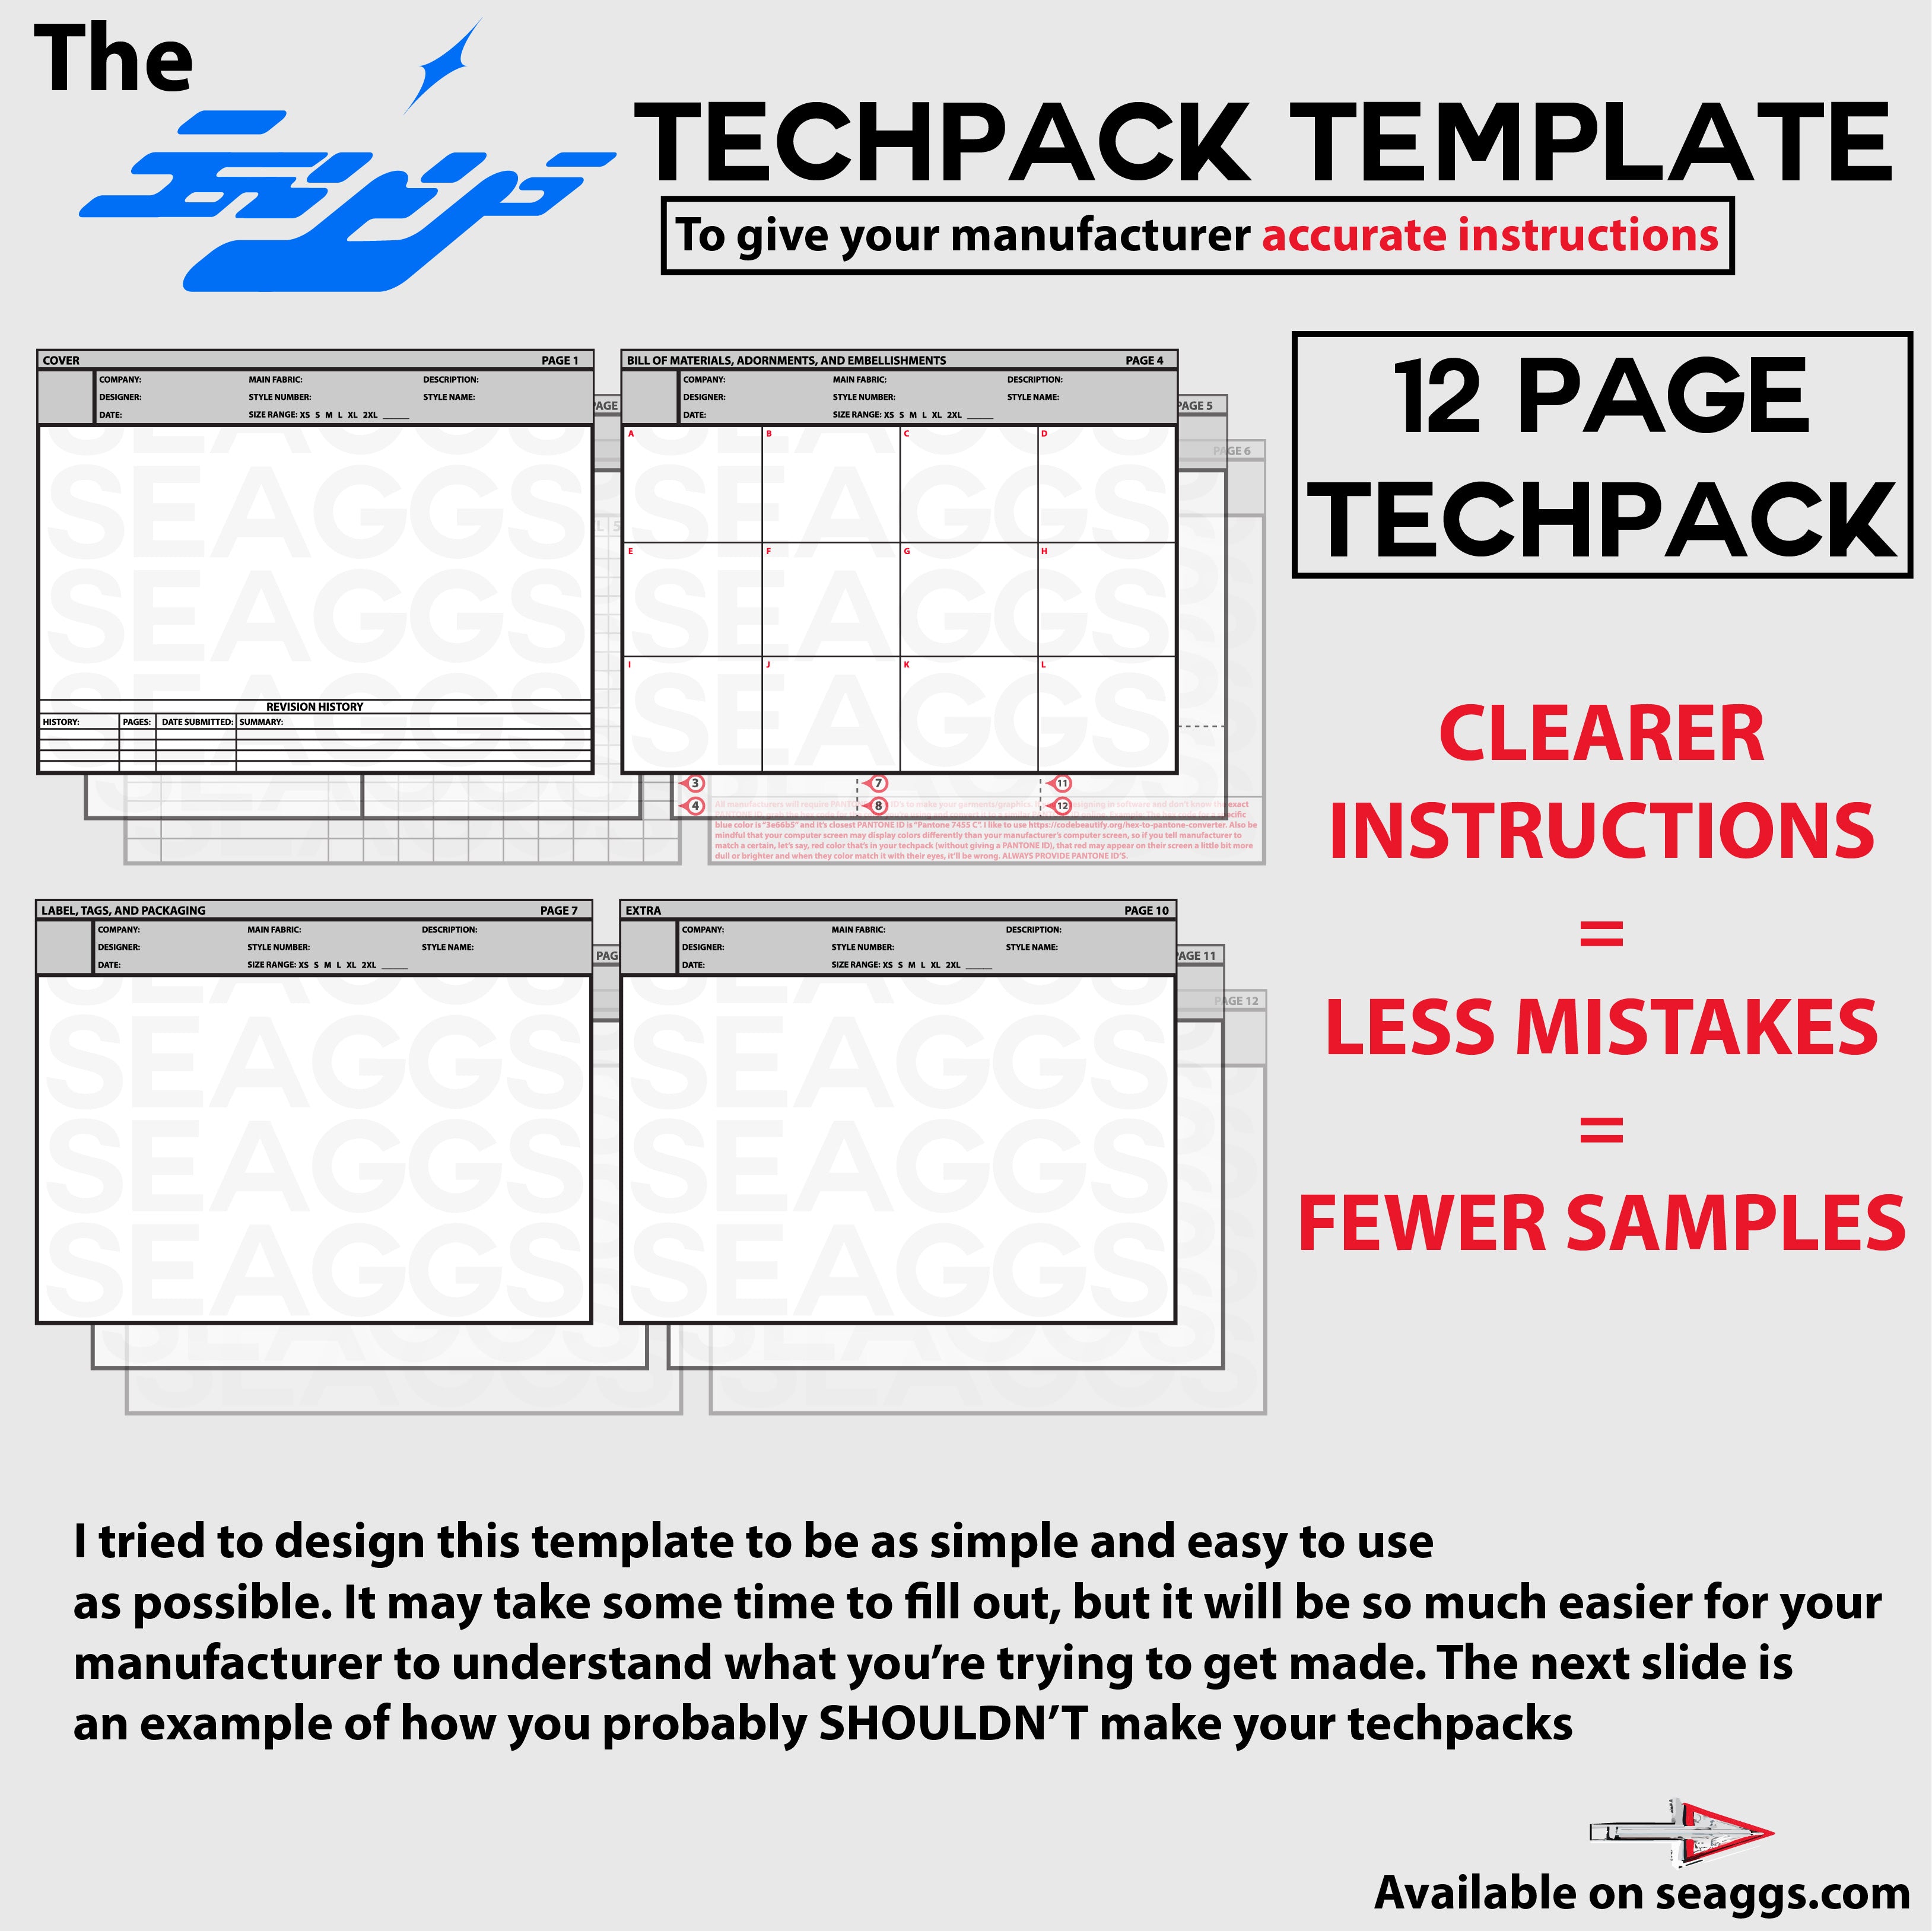 Seaggs Techpack Template